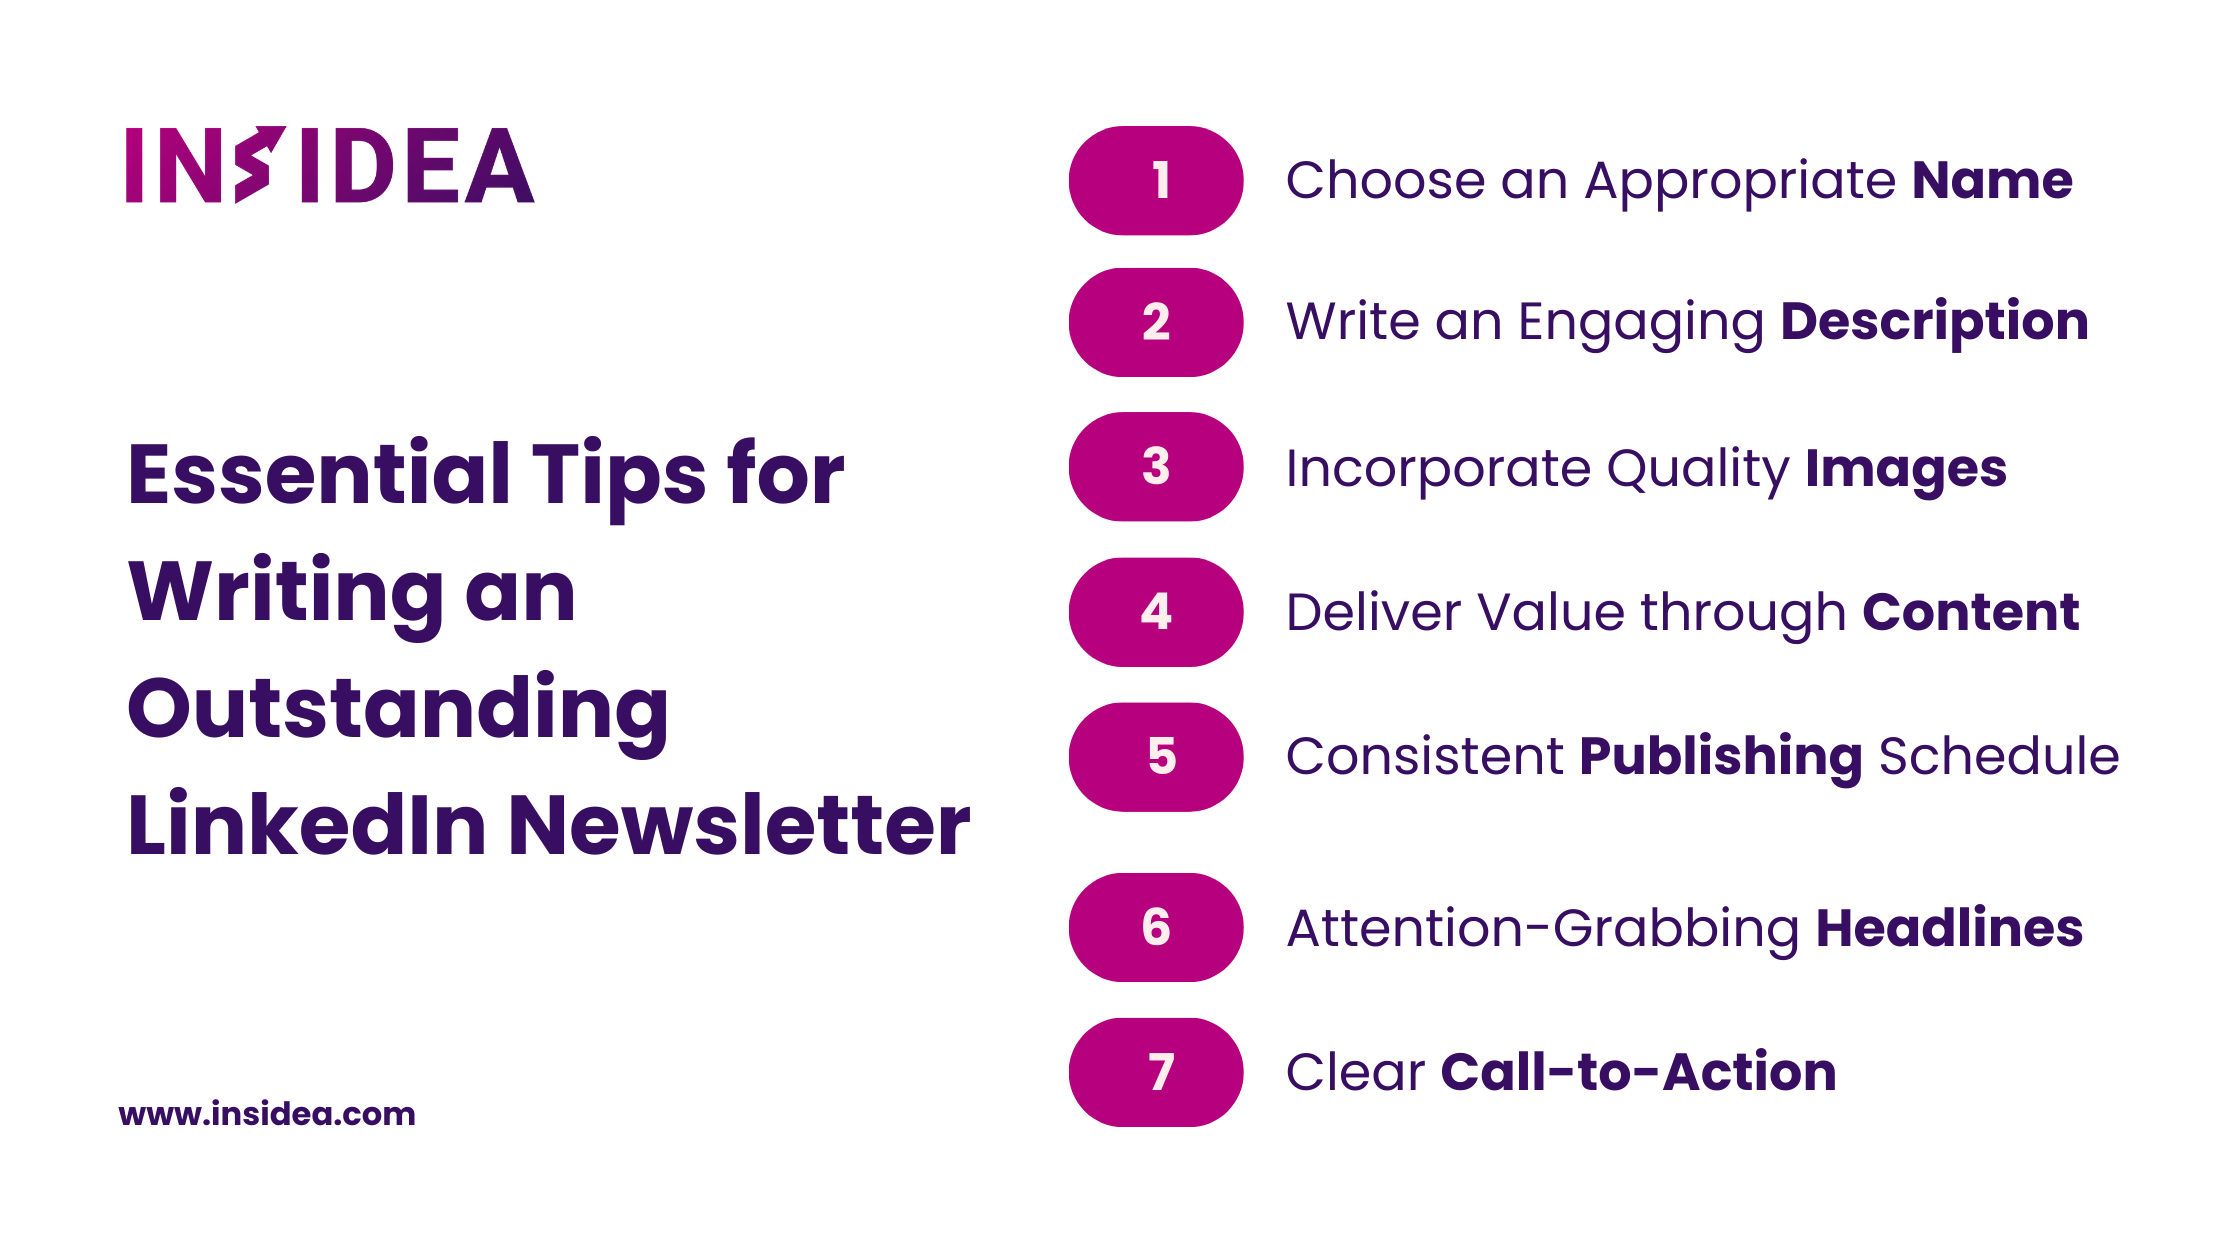 Essential Tips for Writing an Outstanding LinkedIn Newsletter